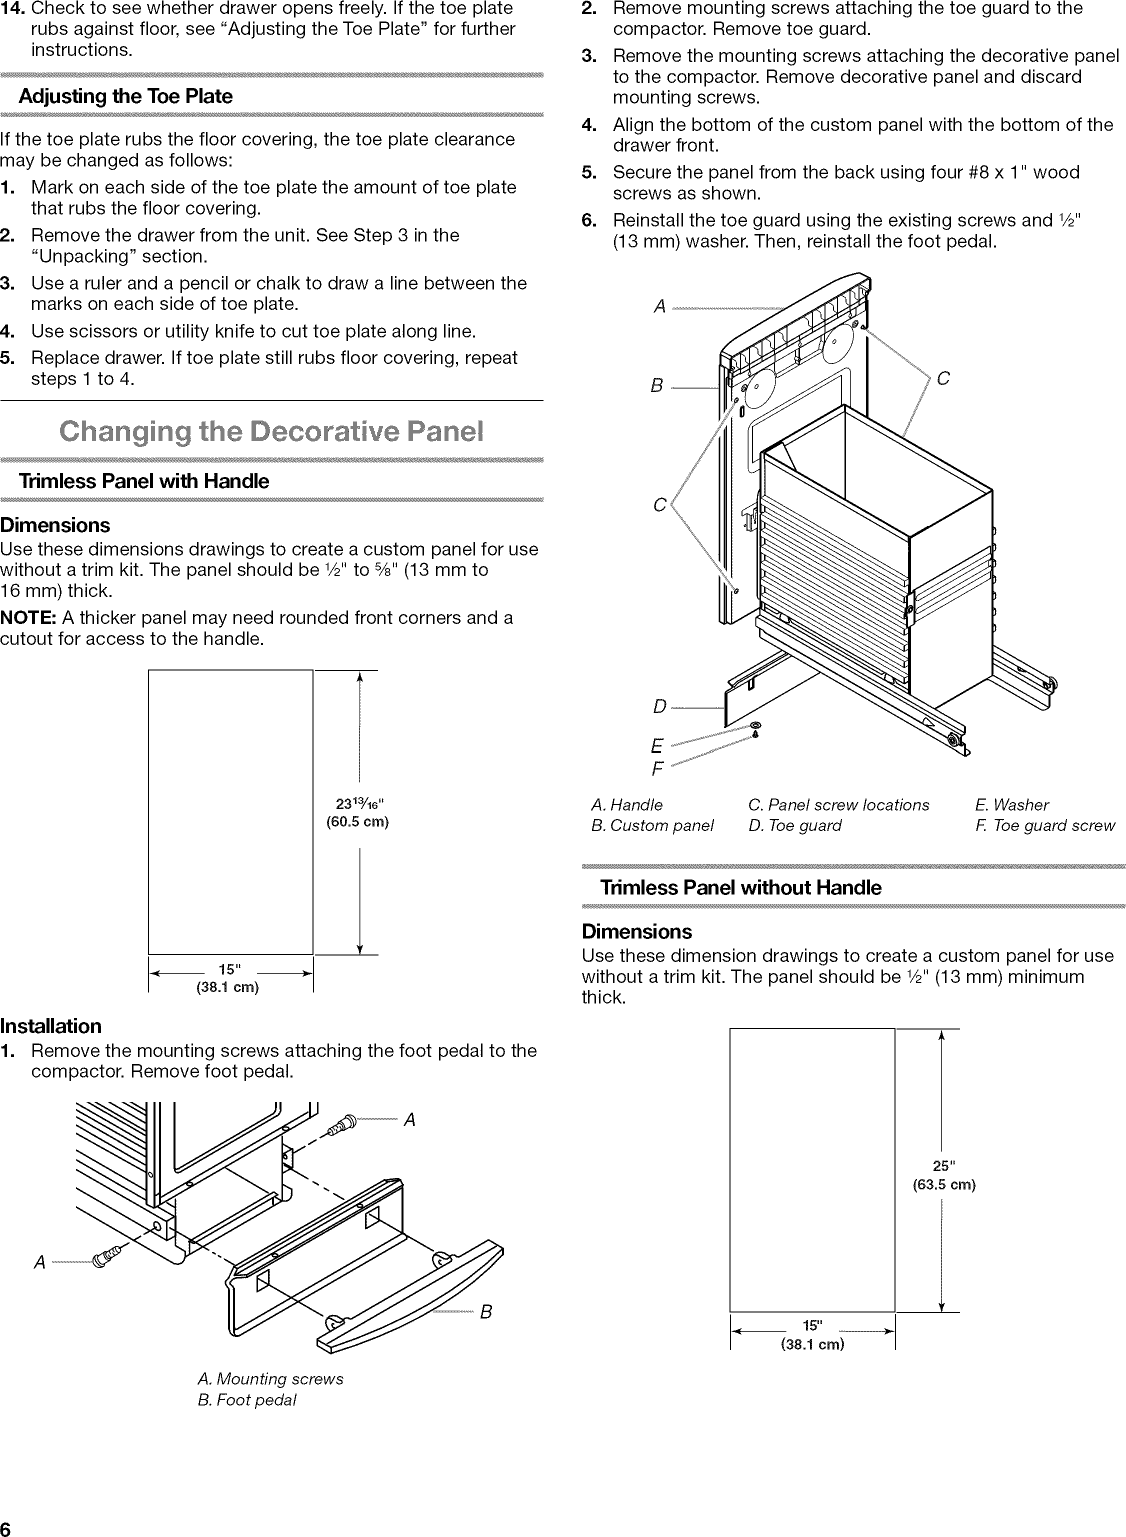 Page 6 of 12 - Whirlpool GC900QPPB6 1512363L User Manual  TRASH COMPACTOR - Manuals And Guides